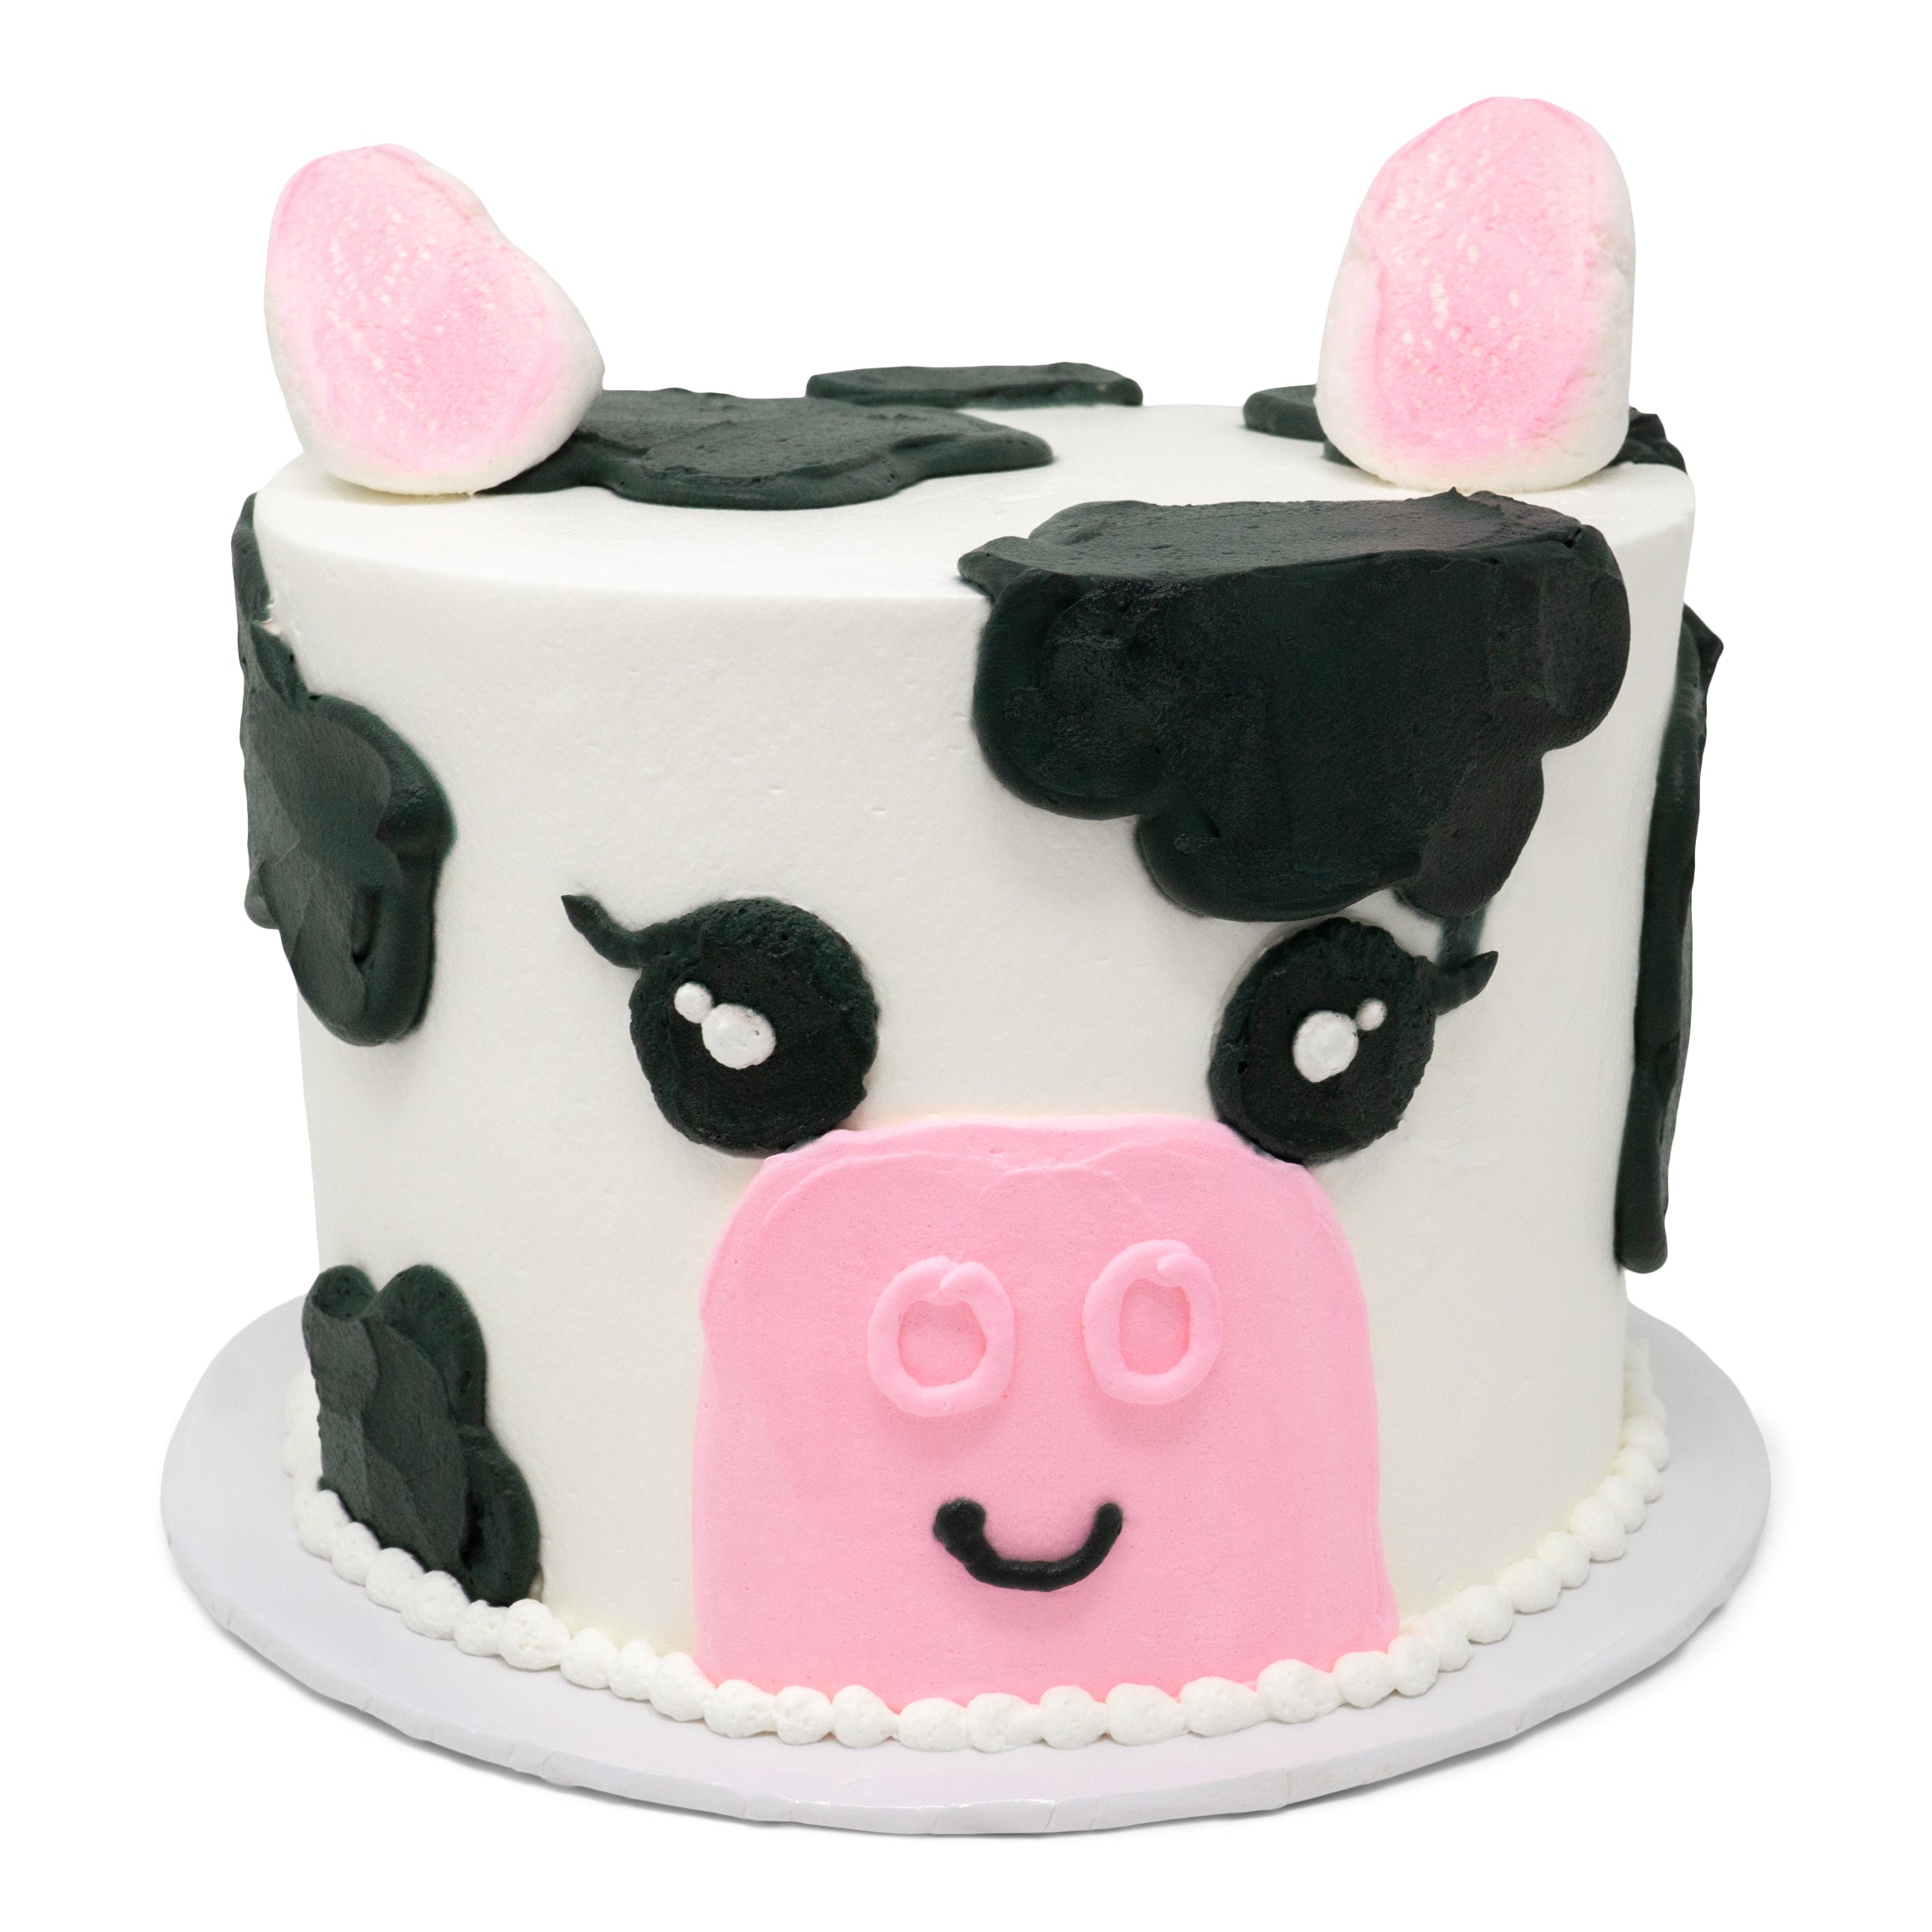 Cow cake: HERE Discover the most popular ideas ❤️